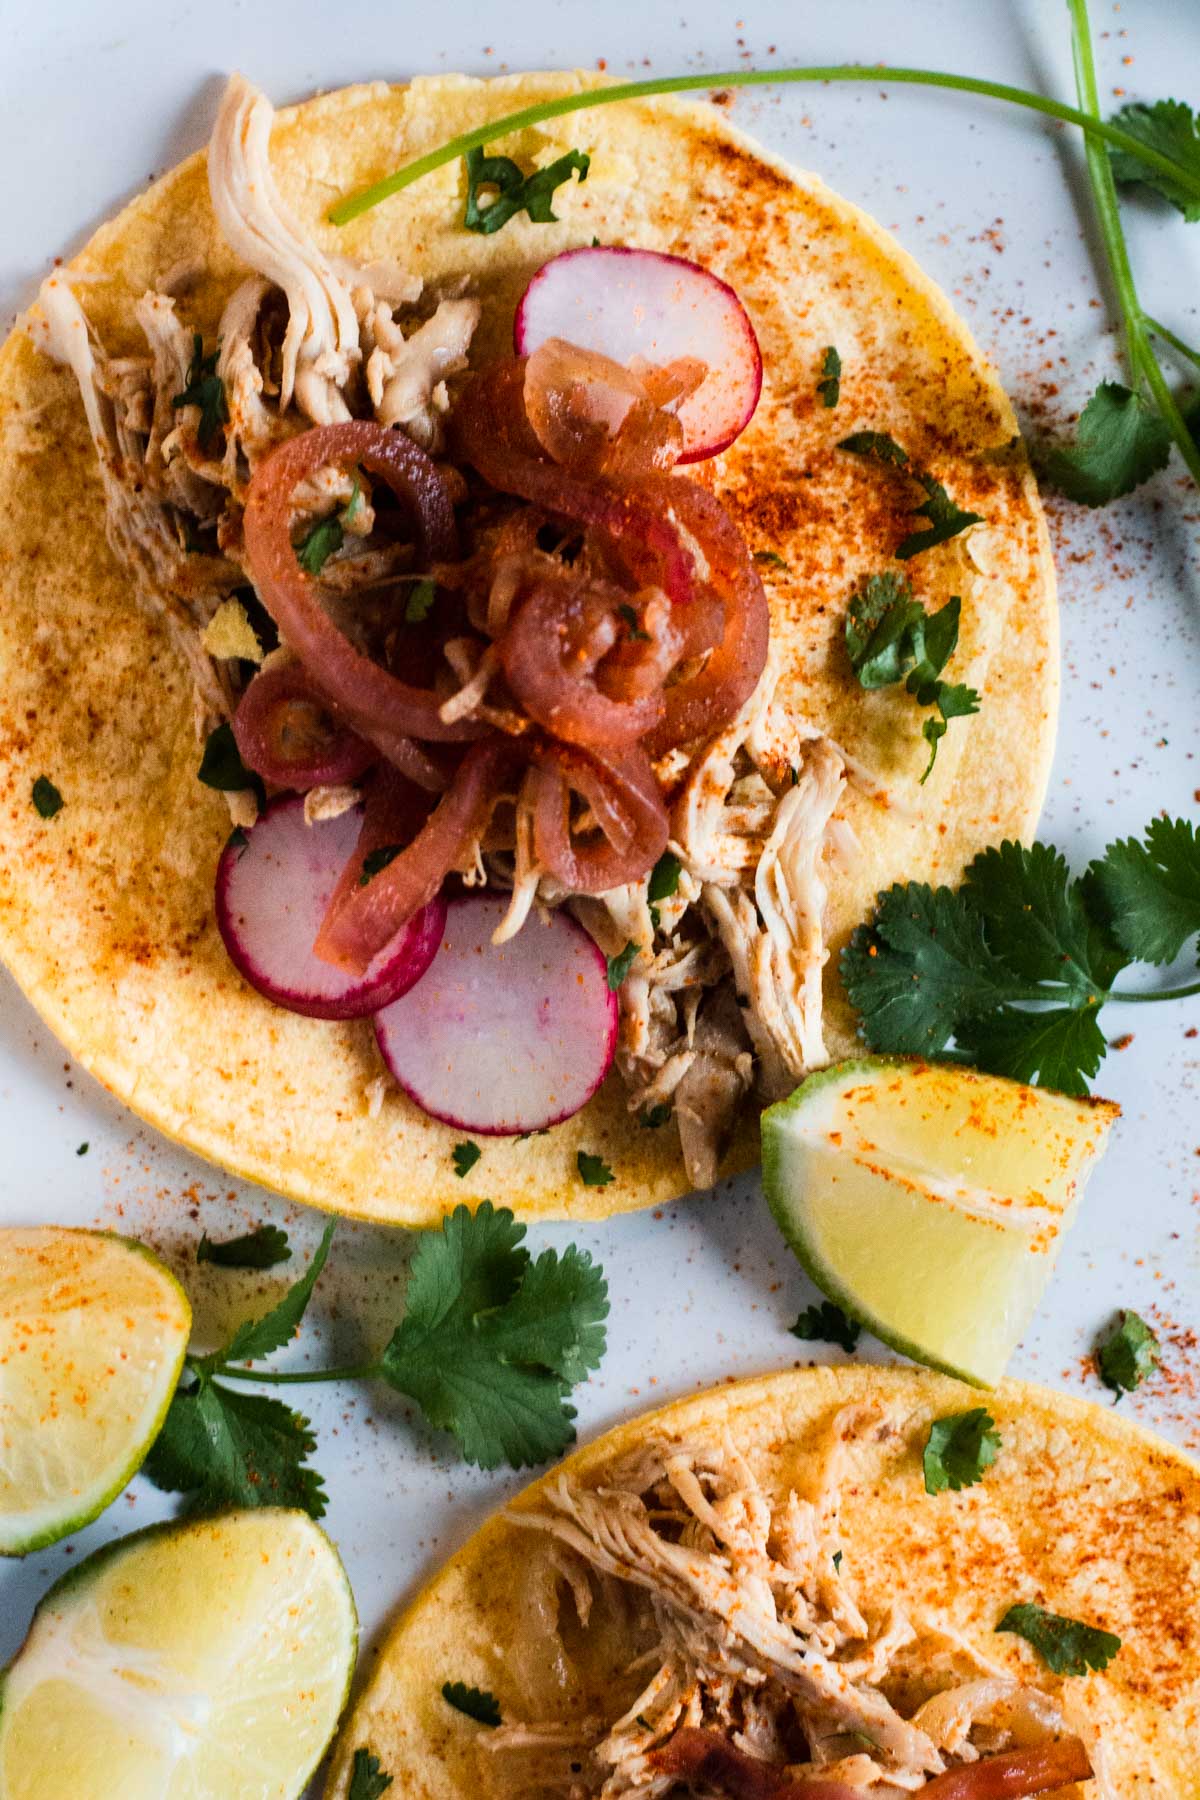 Chicken barbacoa tacos served on yellow corn tortillas, garnished with radishes, cilantro and pickled onions.